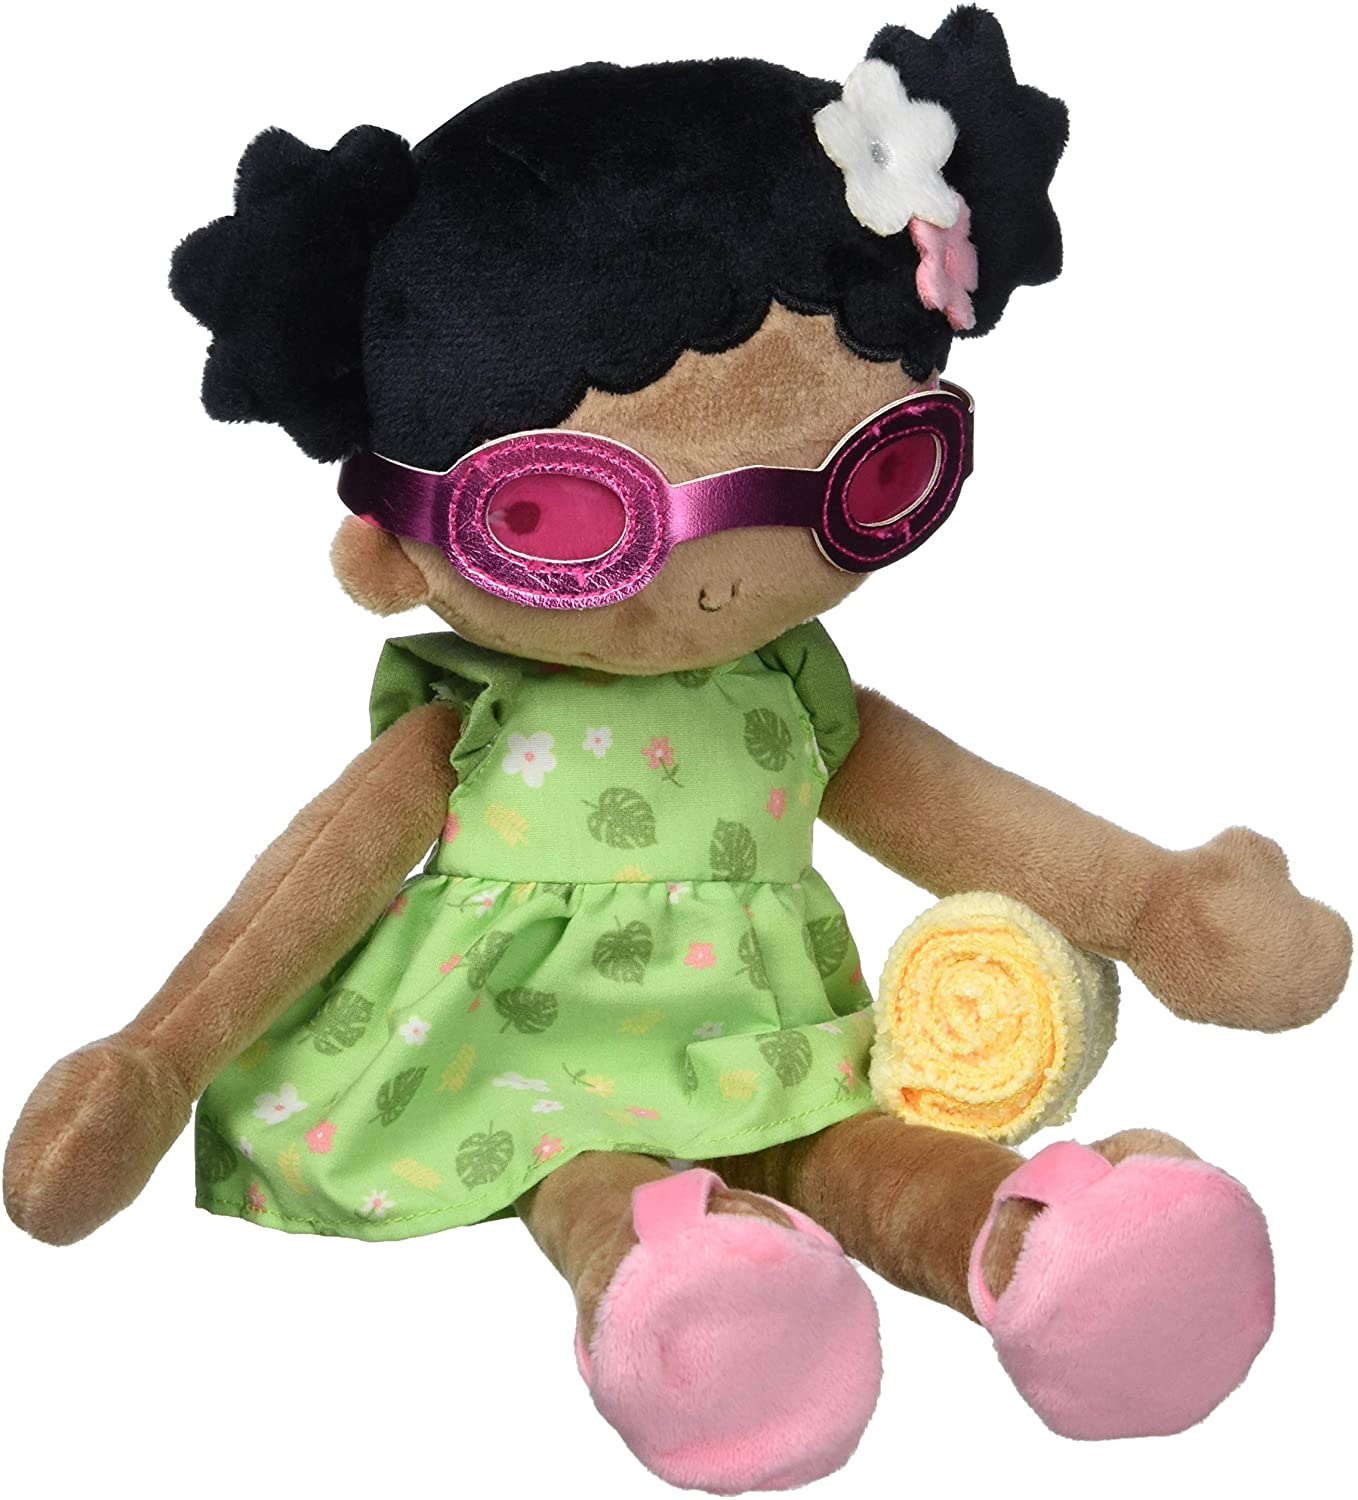 12" Adora Plush Doll with Color Changing Bathing Suit (Skye) $6.75 - Amazon